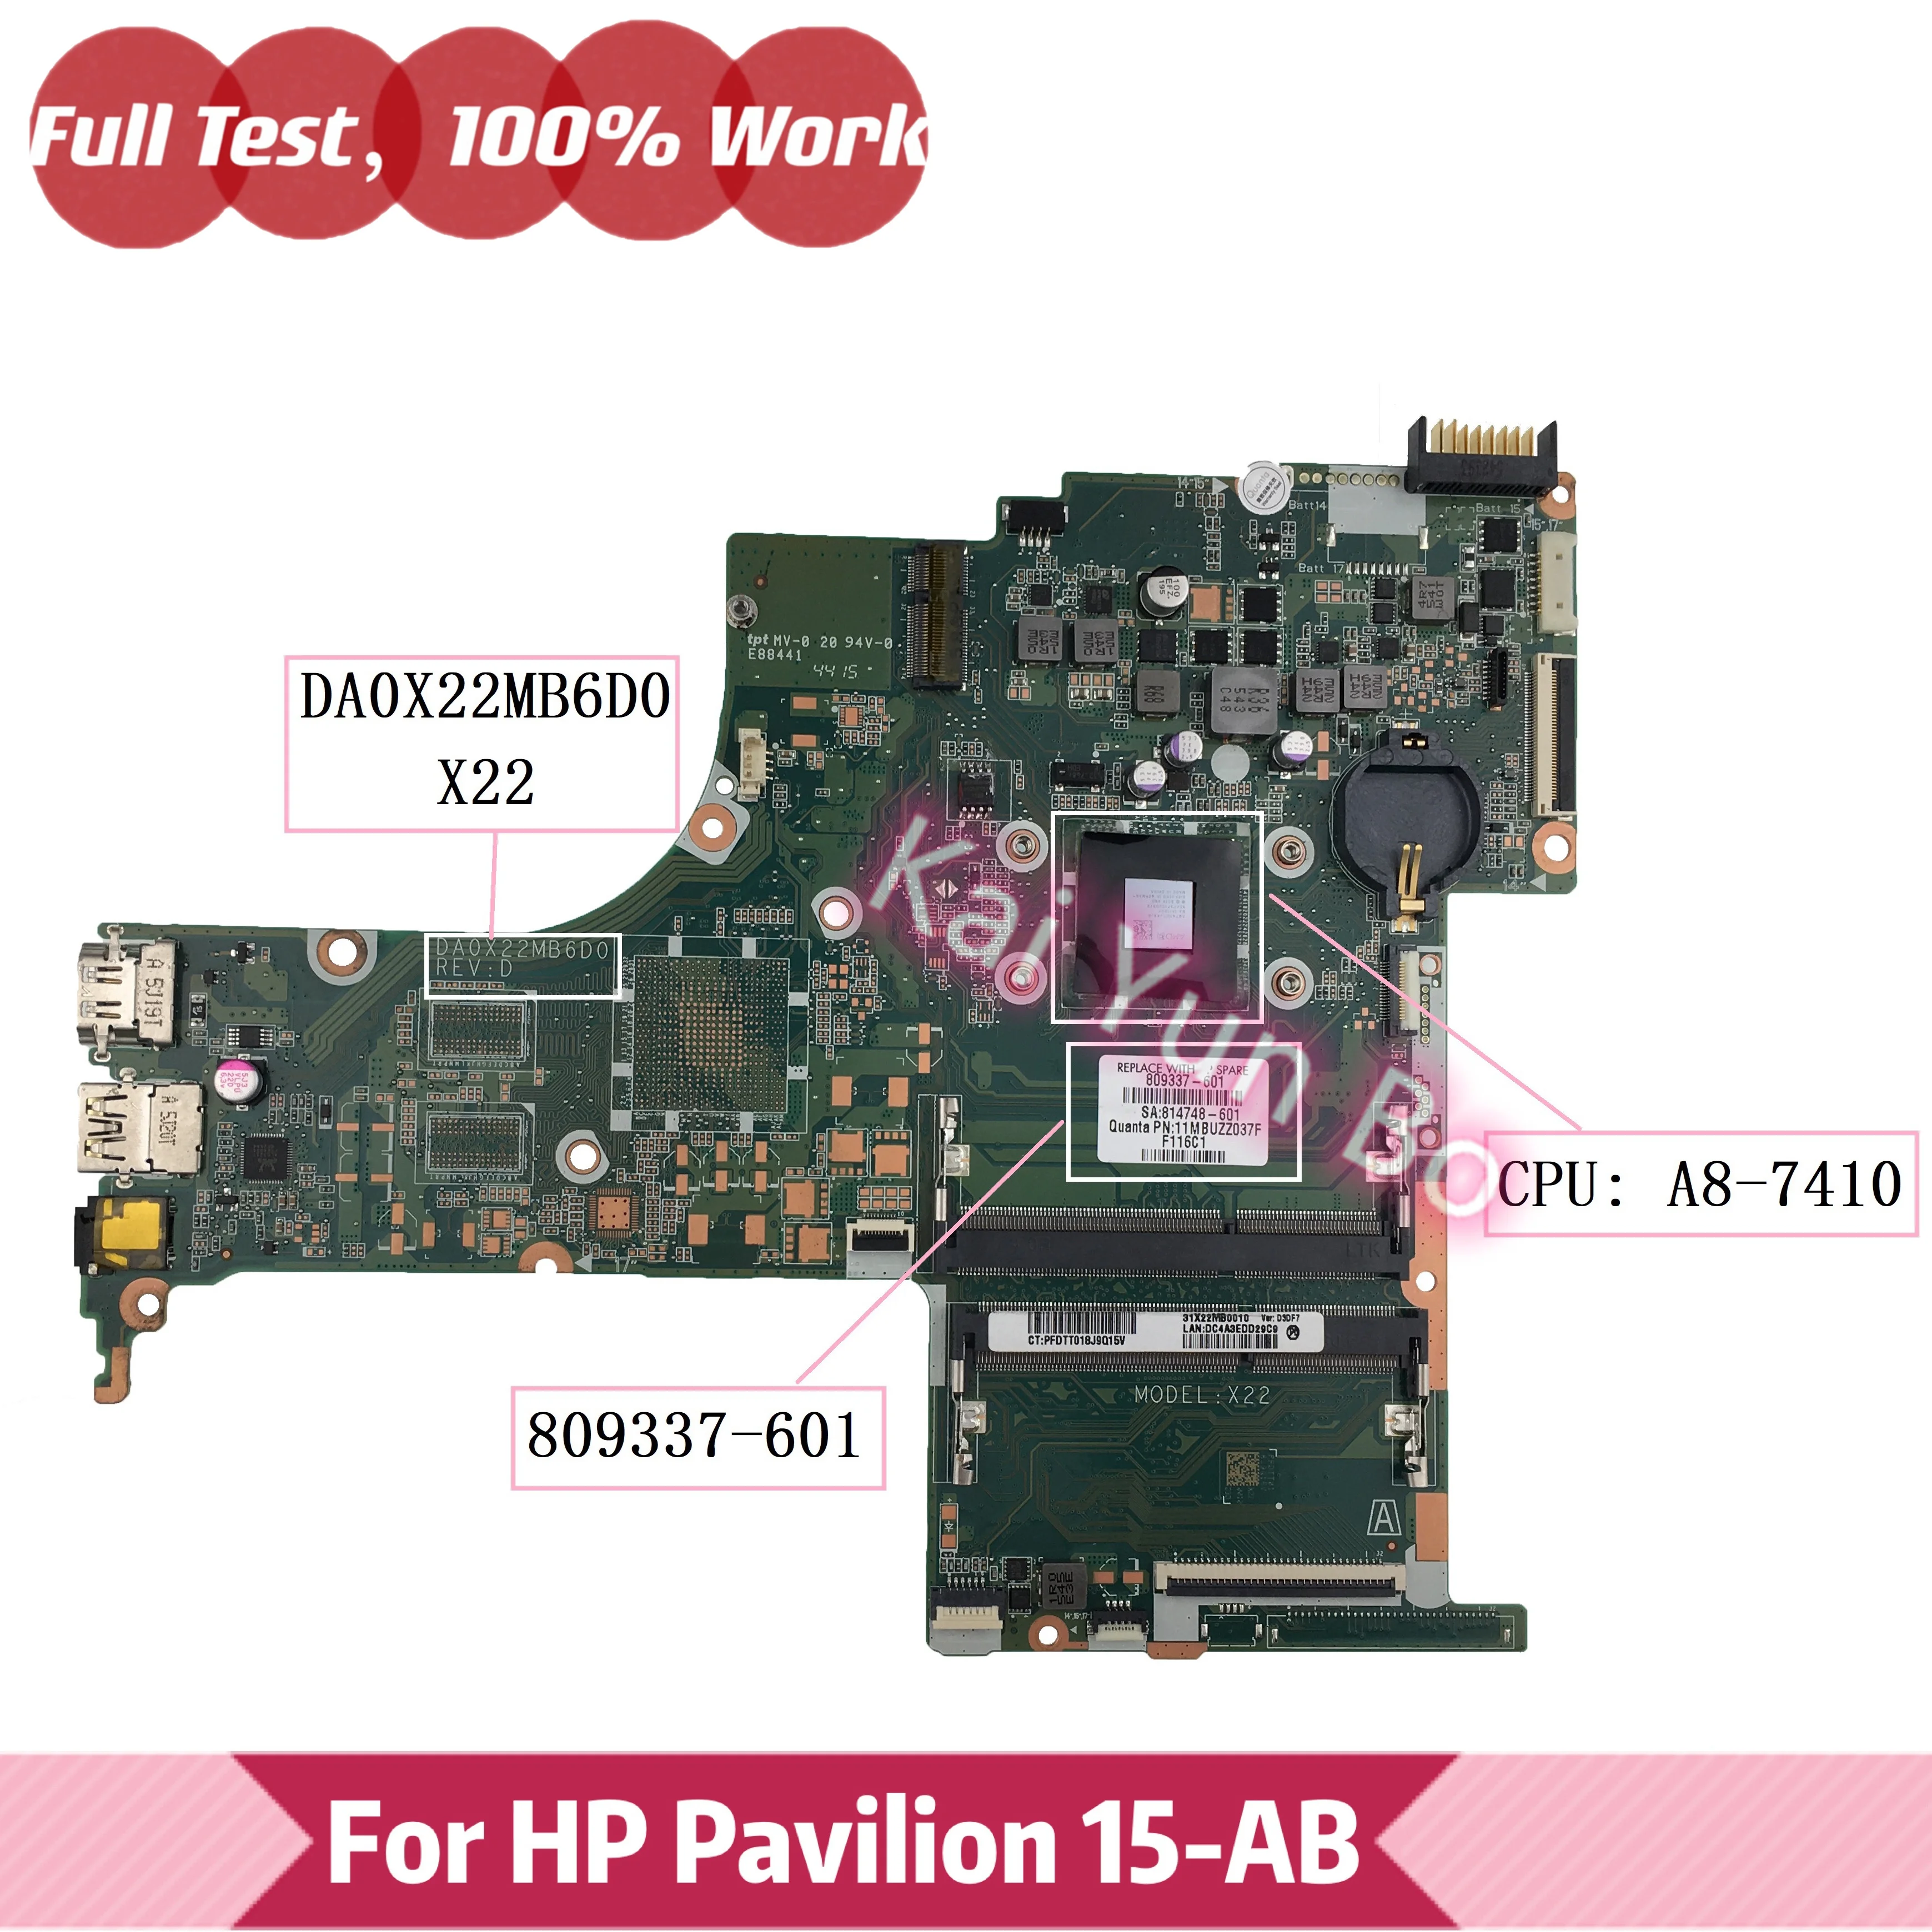 

809336-601 X22 DA0X22MB6D0 For HP Pavilion 15-AB Laptop Motherboard 809336-501 809336-001 with A6-6310 CPU DDR3